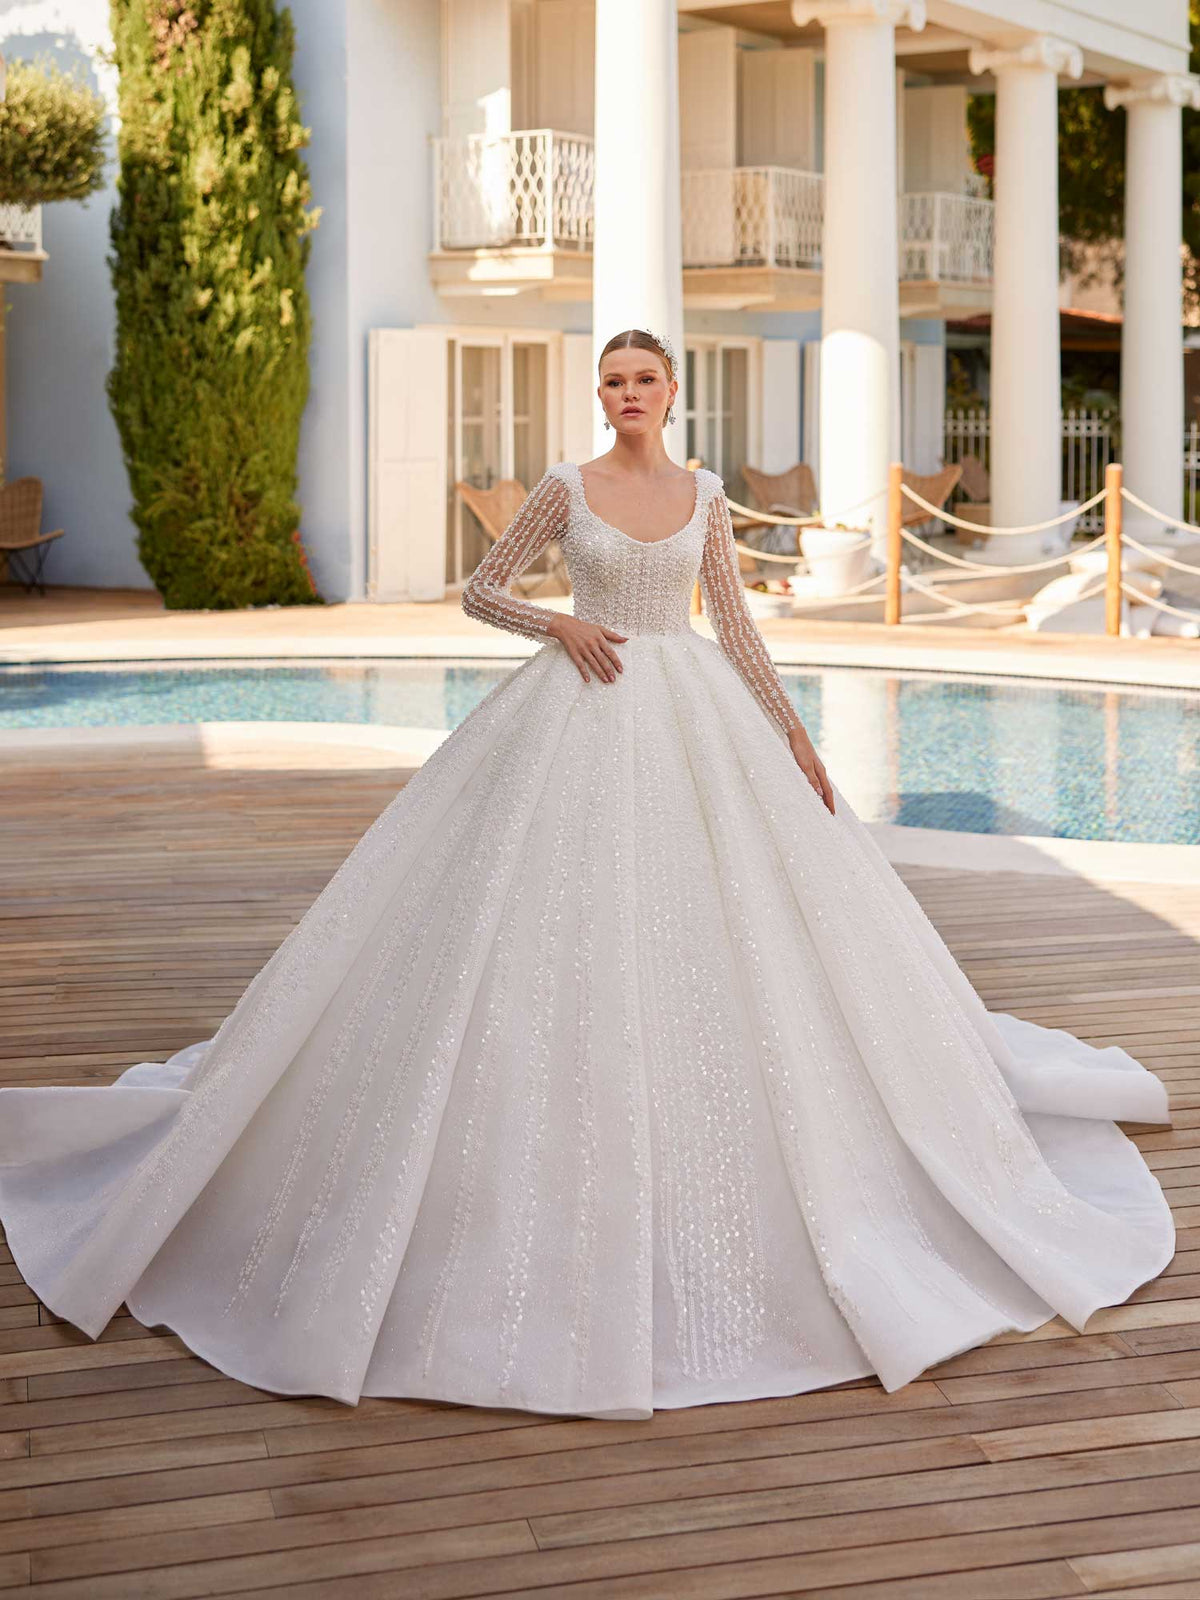 buy Classic Yet Elegant A line Pearl Beaded Wedding Dress Gown With Sleeves online bridal shops